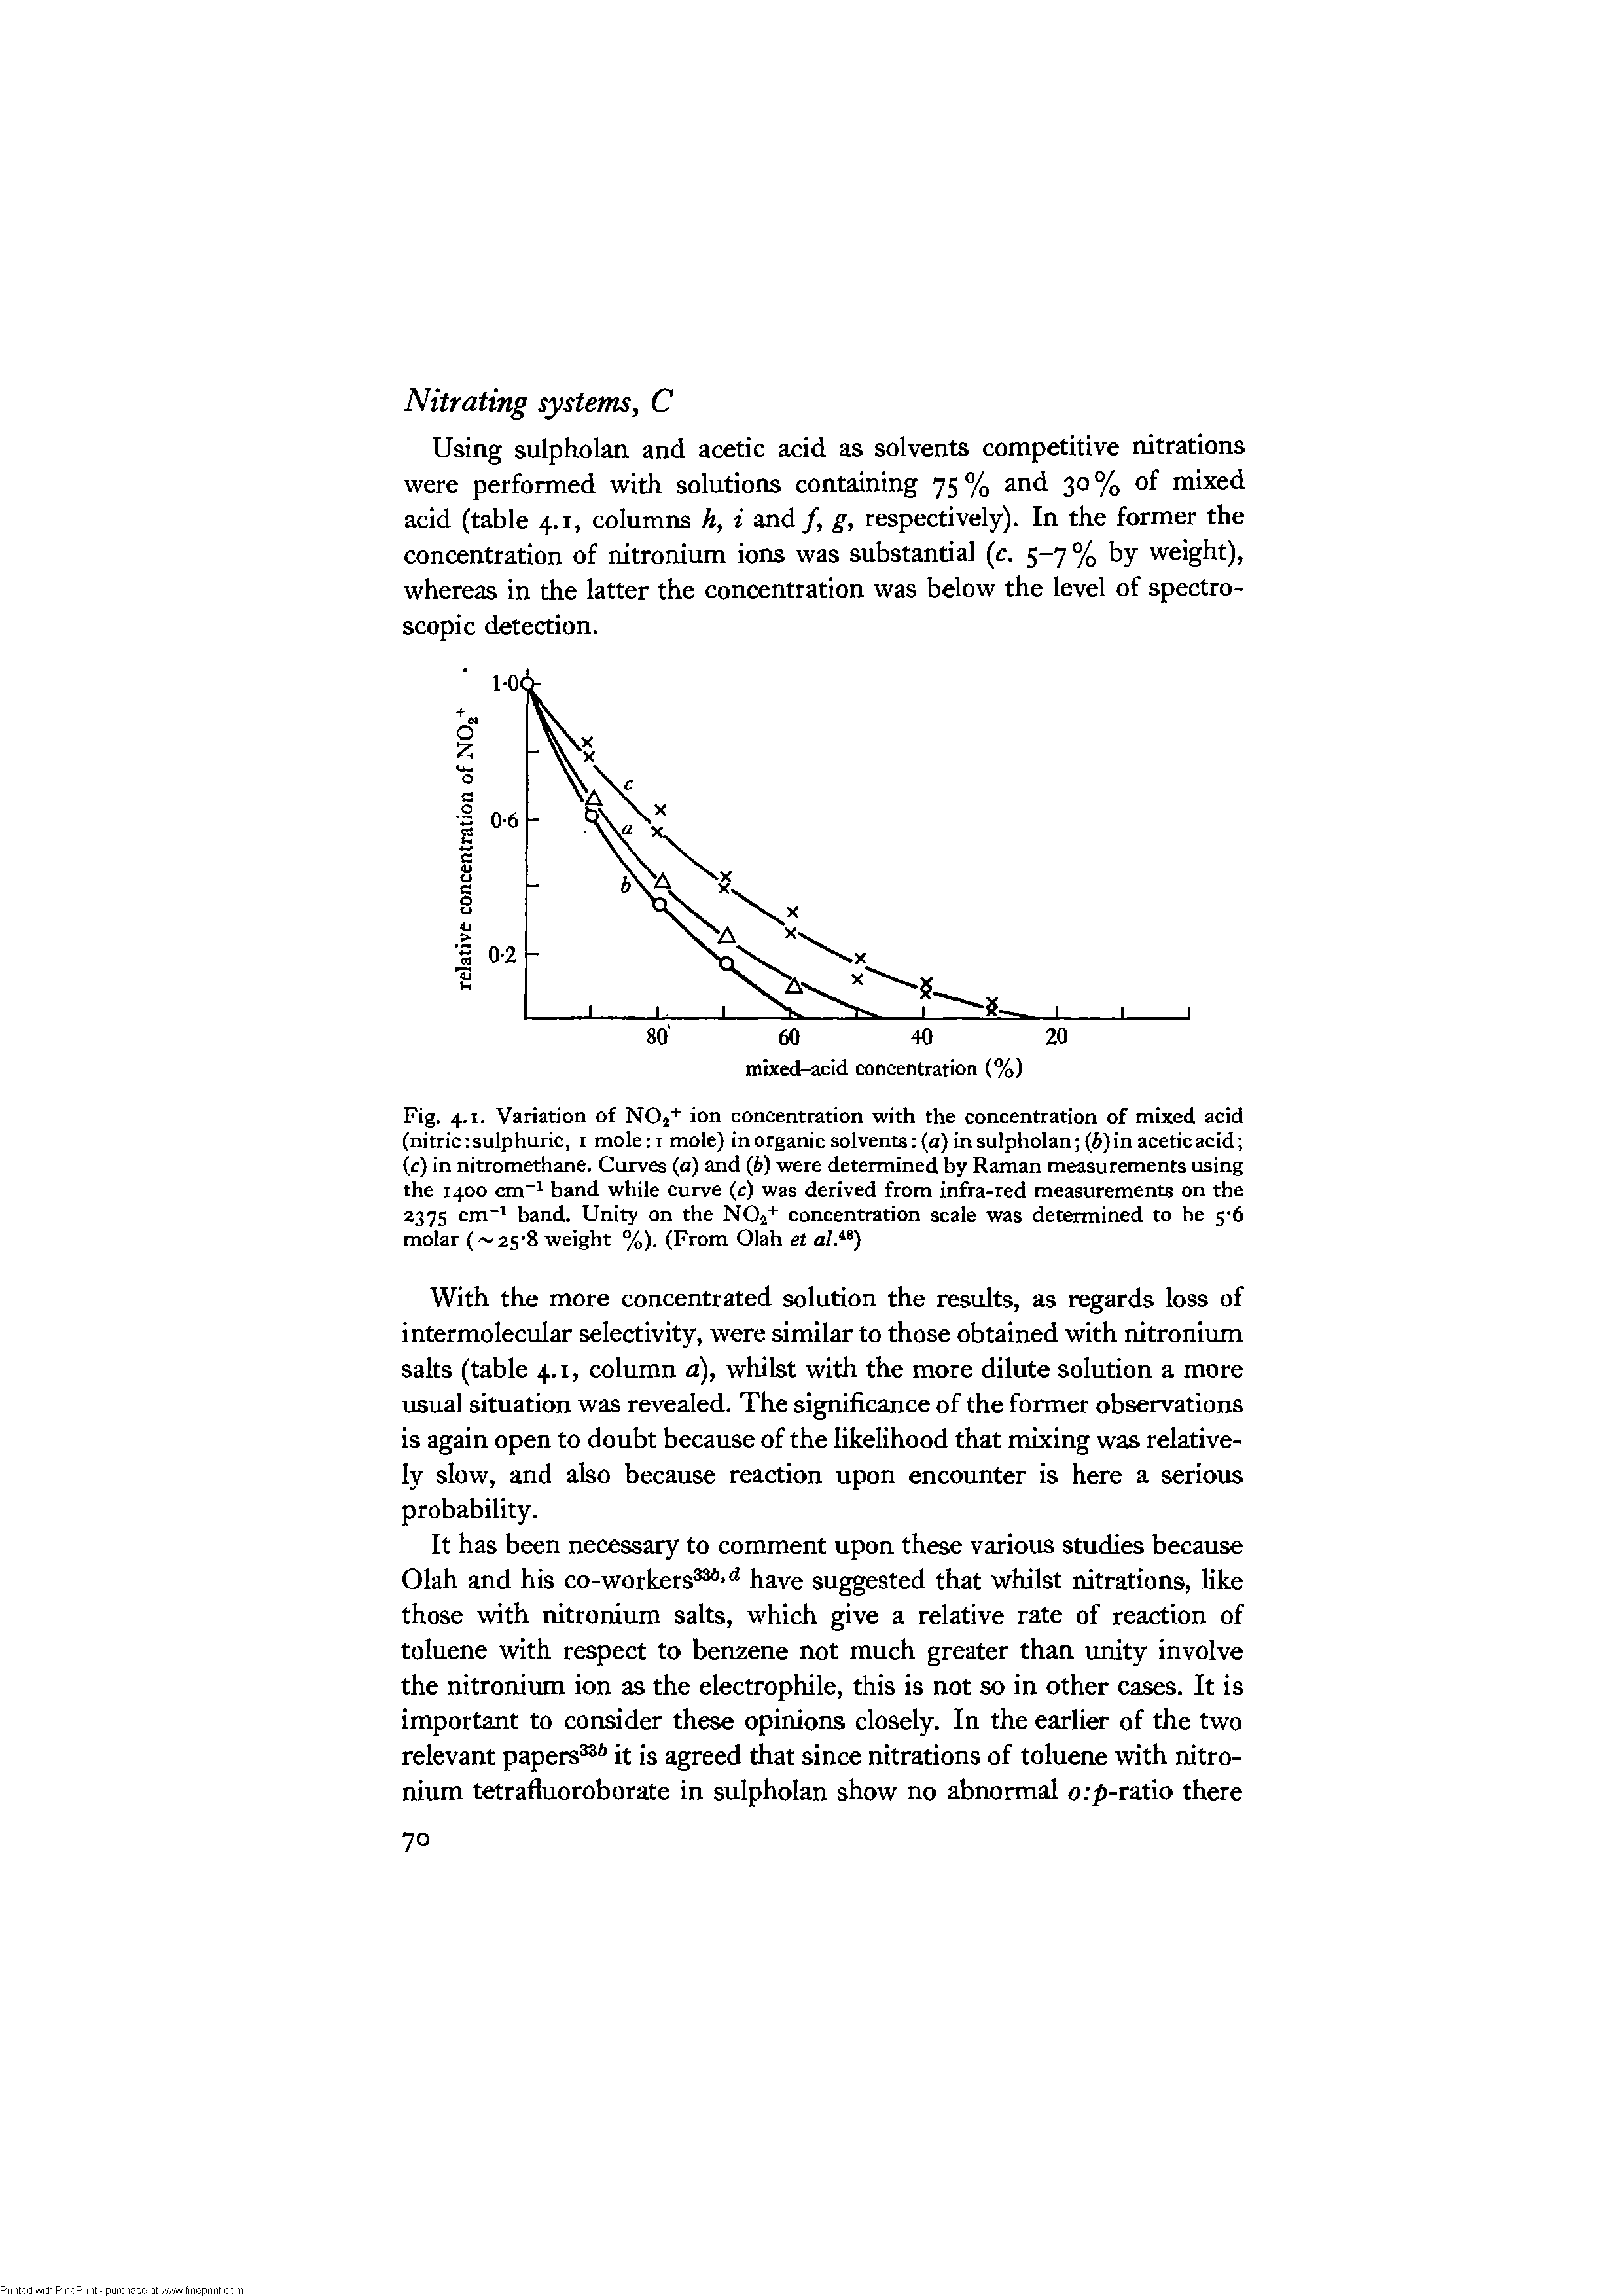 Fig. 4.1. Variation of NO2+ ion concentration with the concentration of mixed acid (nitric sulphuric, i mole i mole) inorganic solvents (a) in sulpholan (6)in aceticacid (c) in nitromethane. Curves (a) and (6) were determined by Raman measurements using the 1400 cm band while curve (c) was derived from infra-red measurements on the 237s cm band. Unity on the NO2+ concentration scale was determined to be 5-6 molar ( 2S 8 weight %). (From Olah et...